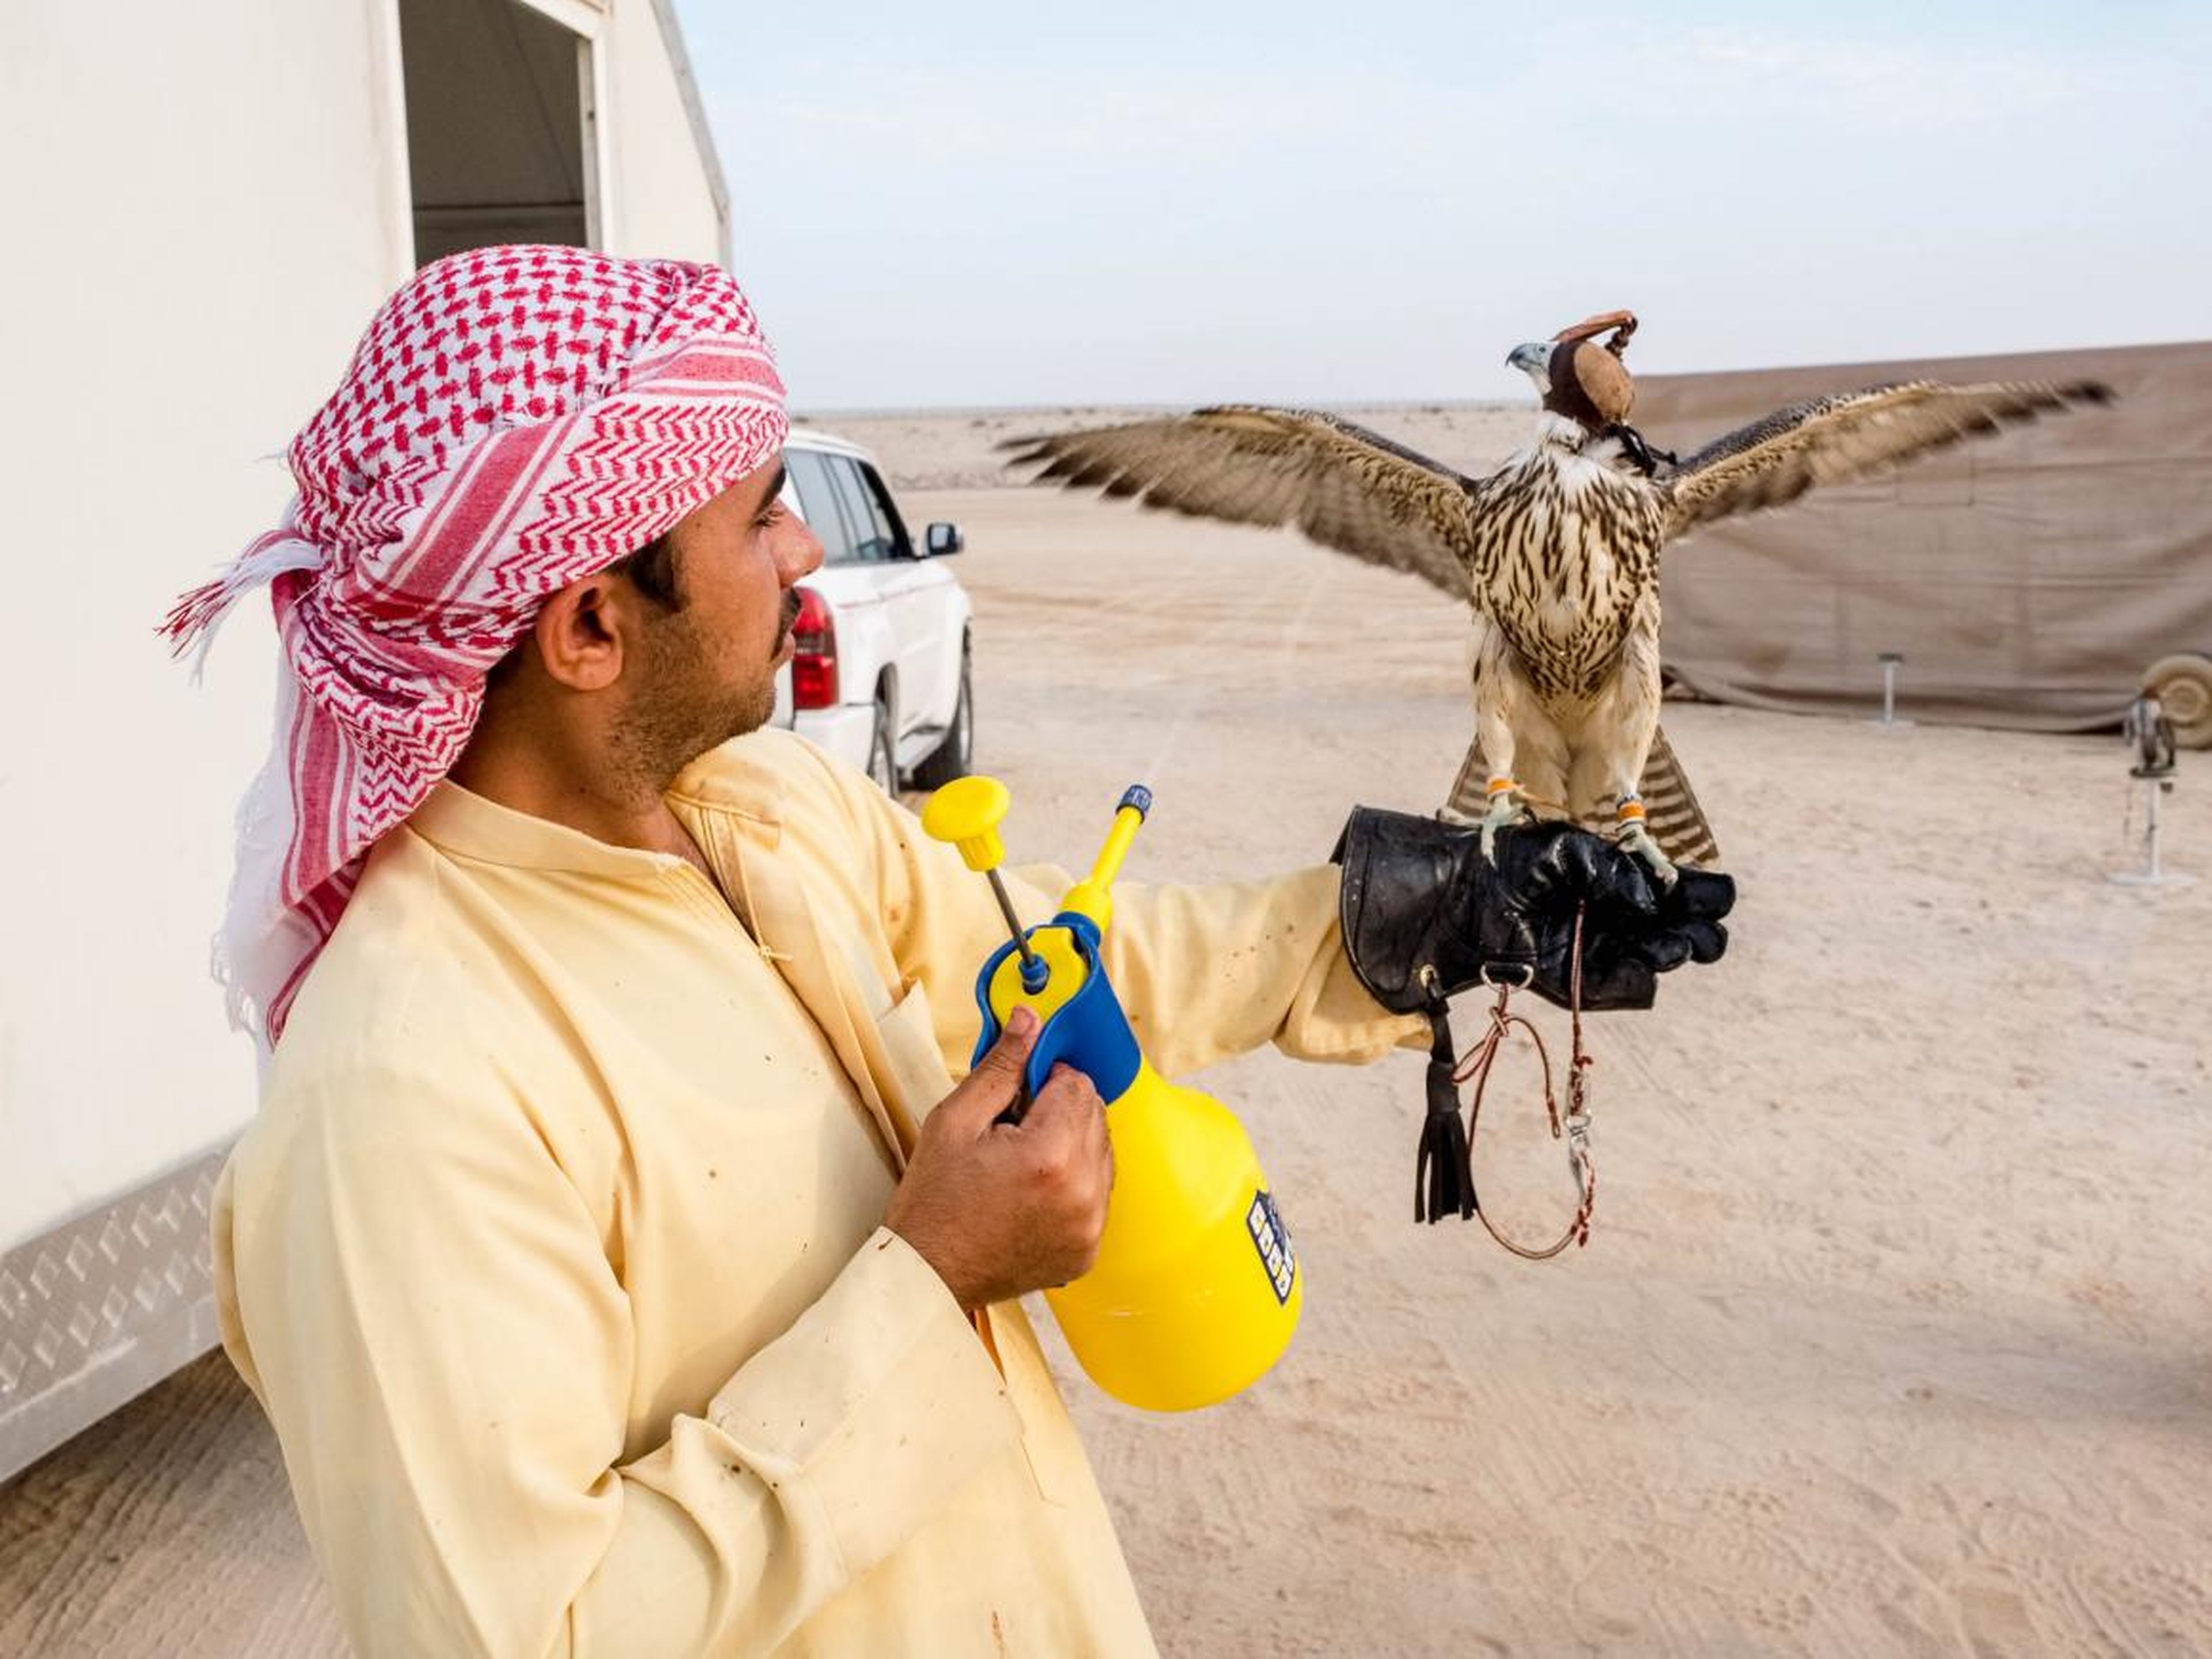 It was fascinating to watch the complex way that the falconers train their falcons to race at hundreds of miles an hour, using both modern and ancient techniques.